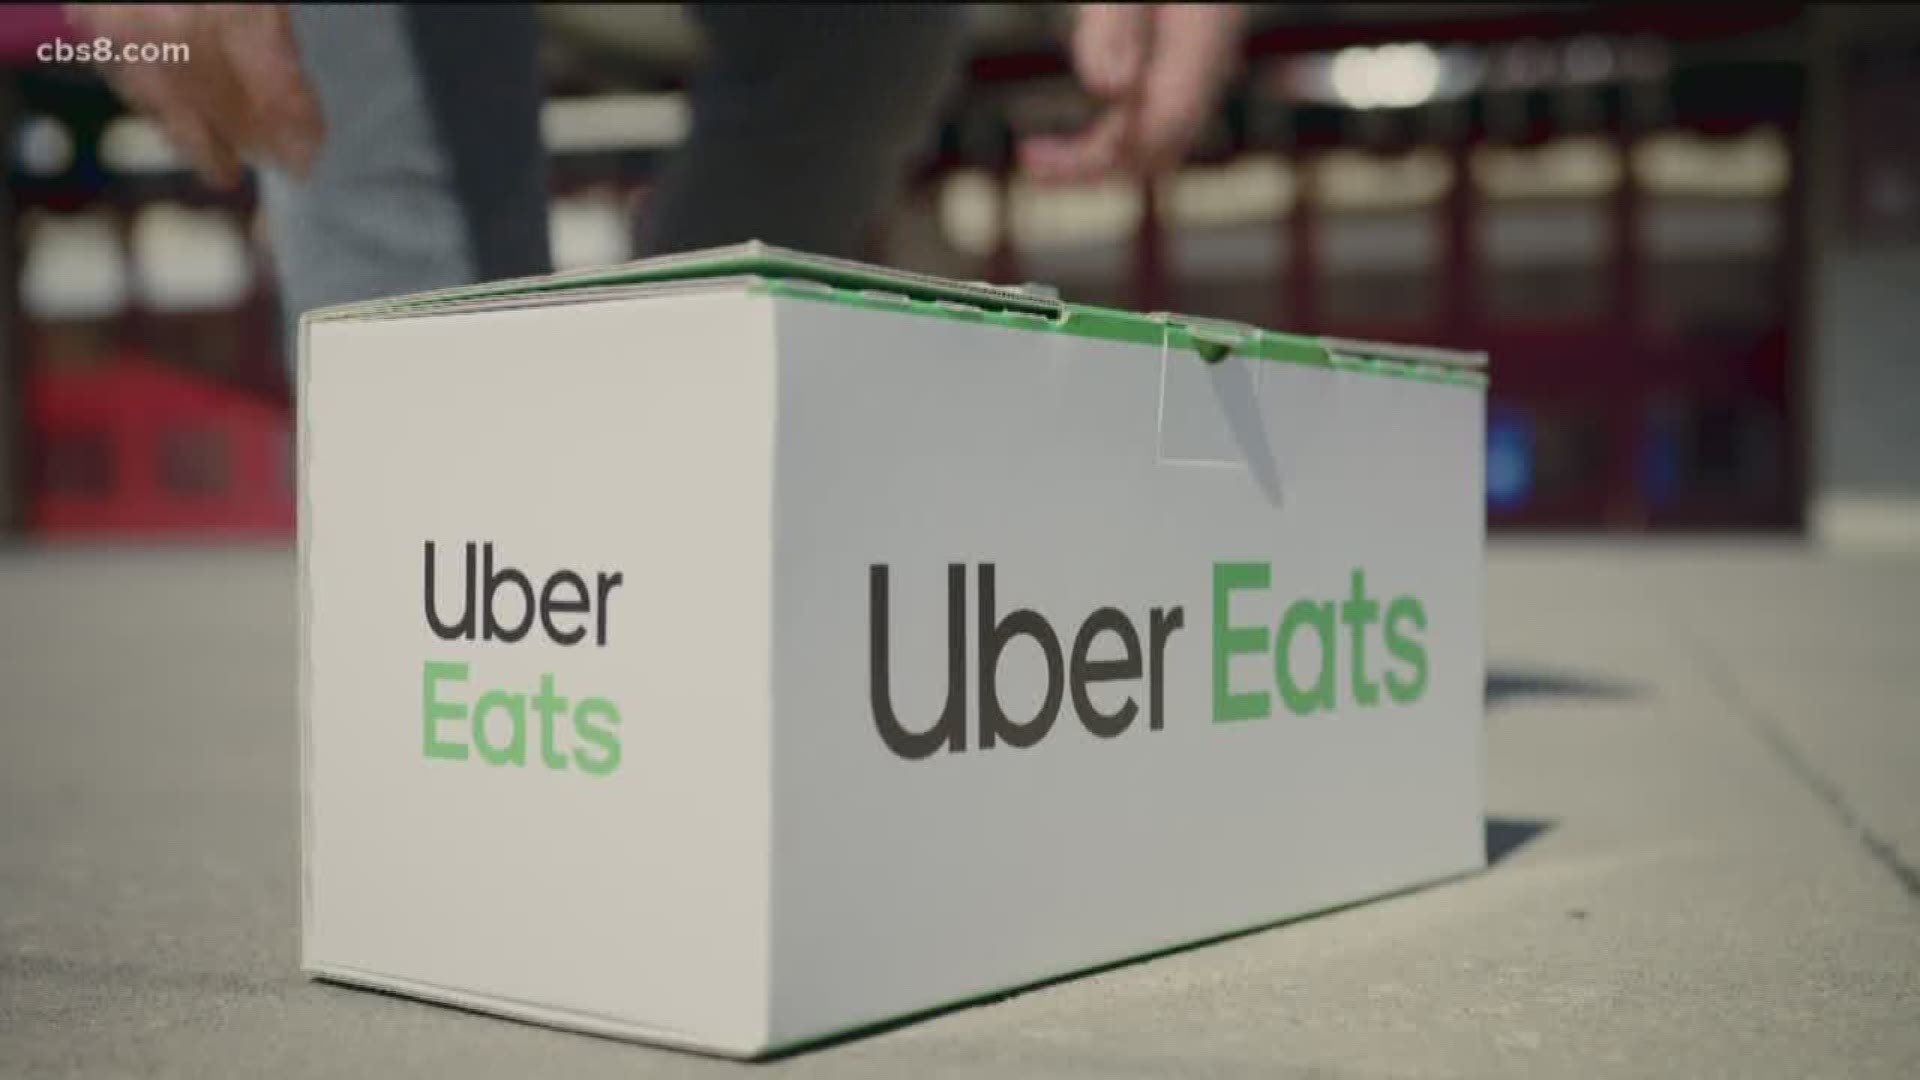 The company's Uber Eats unit began the tests in San Diego with McDonald's and plans to expand to other restaurants later this year.